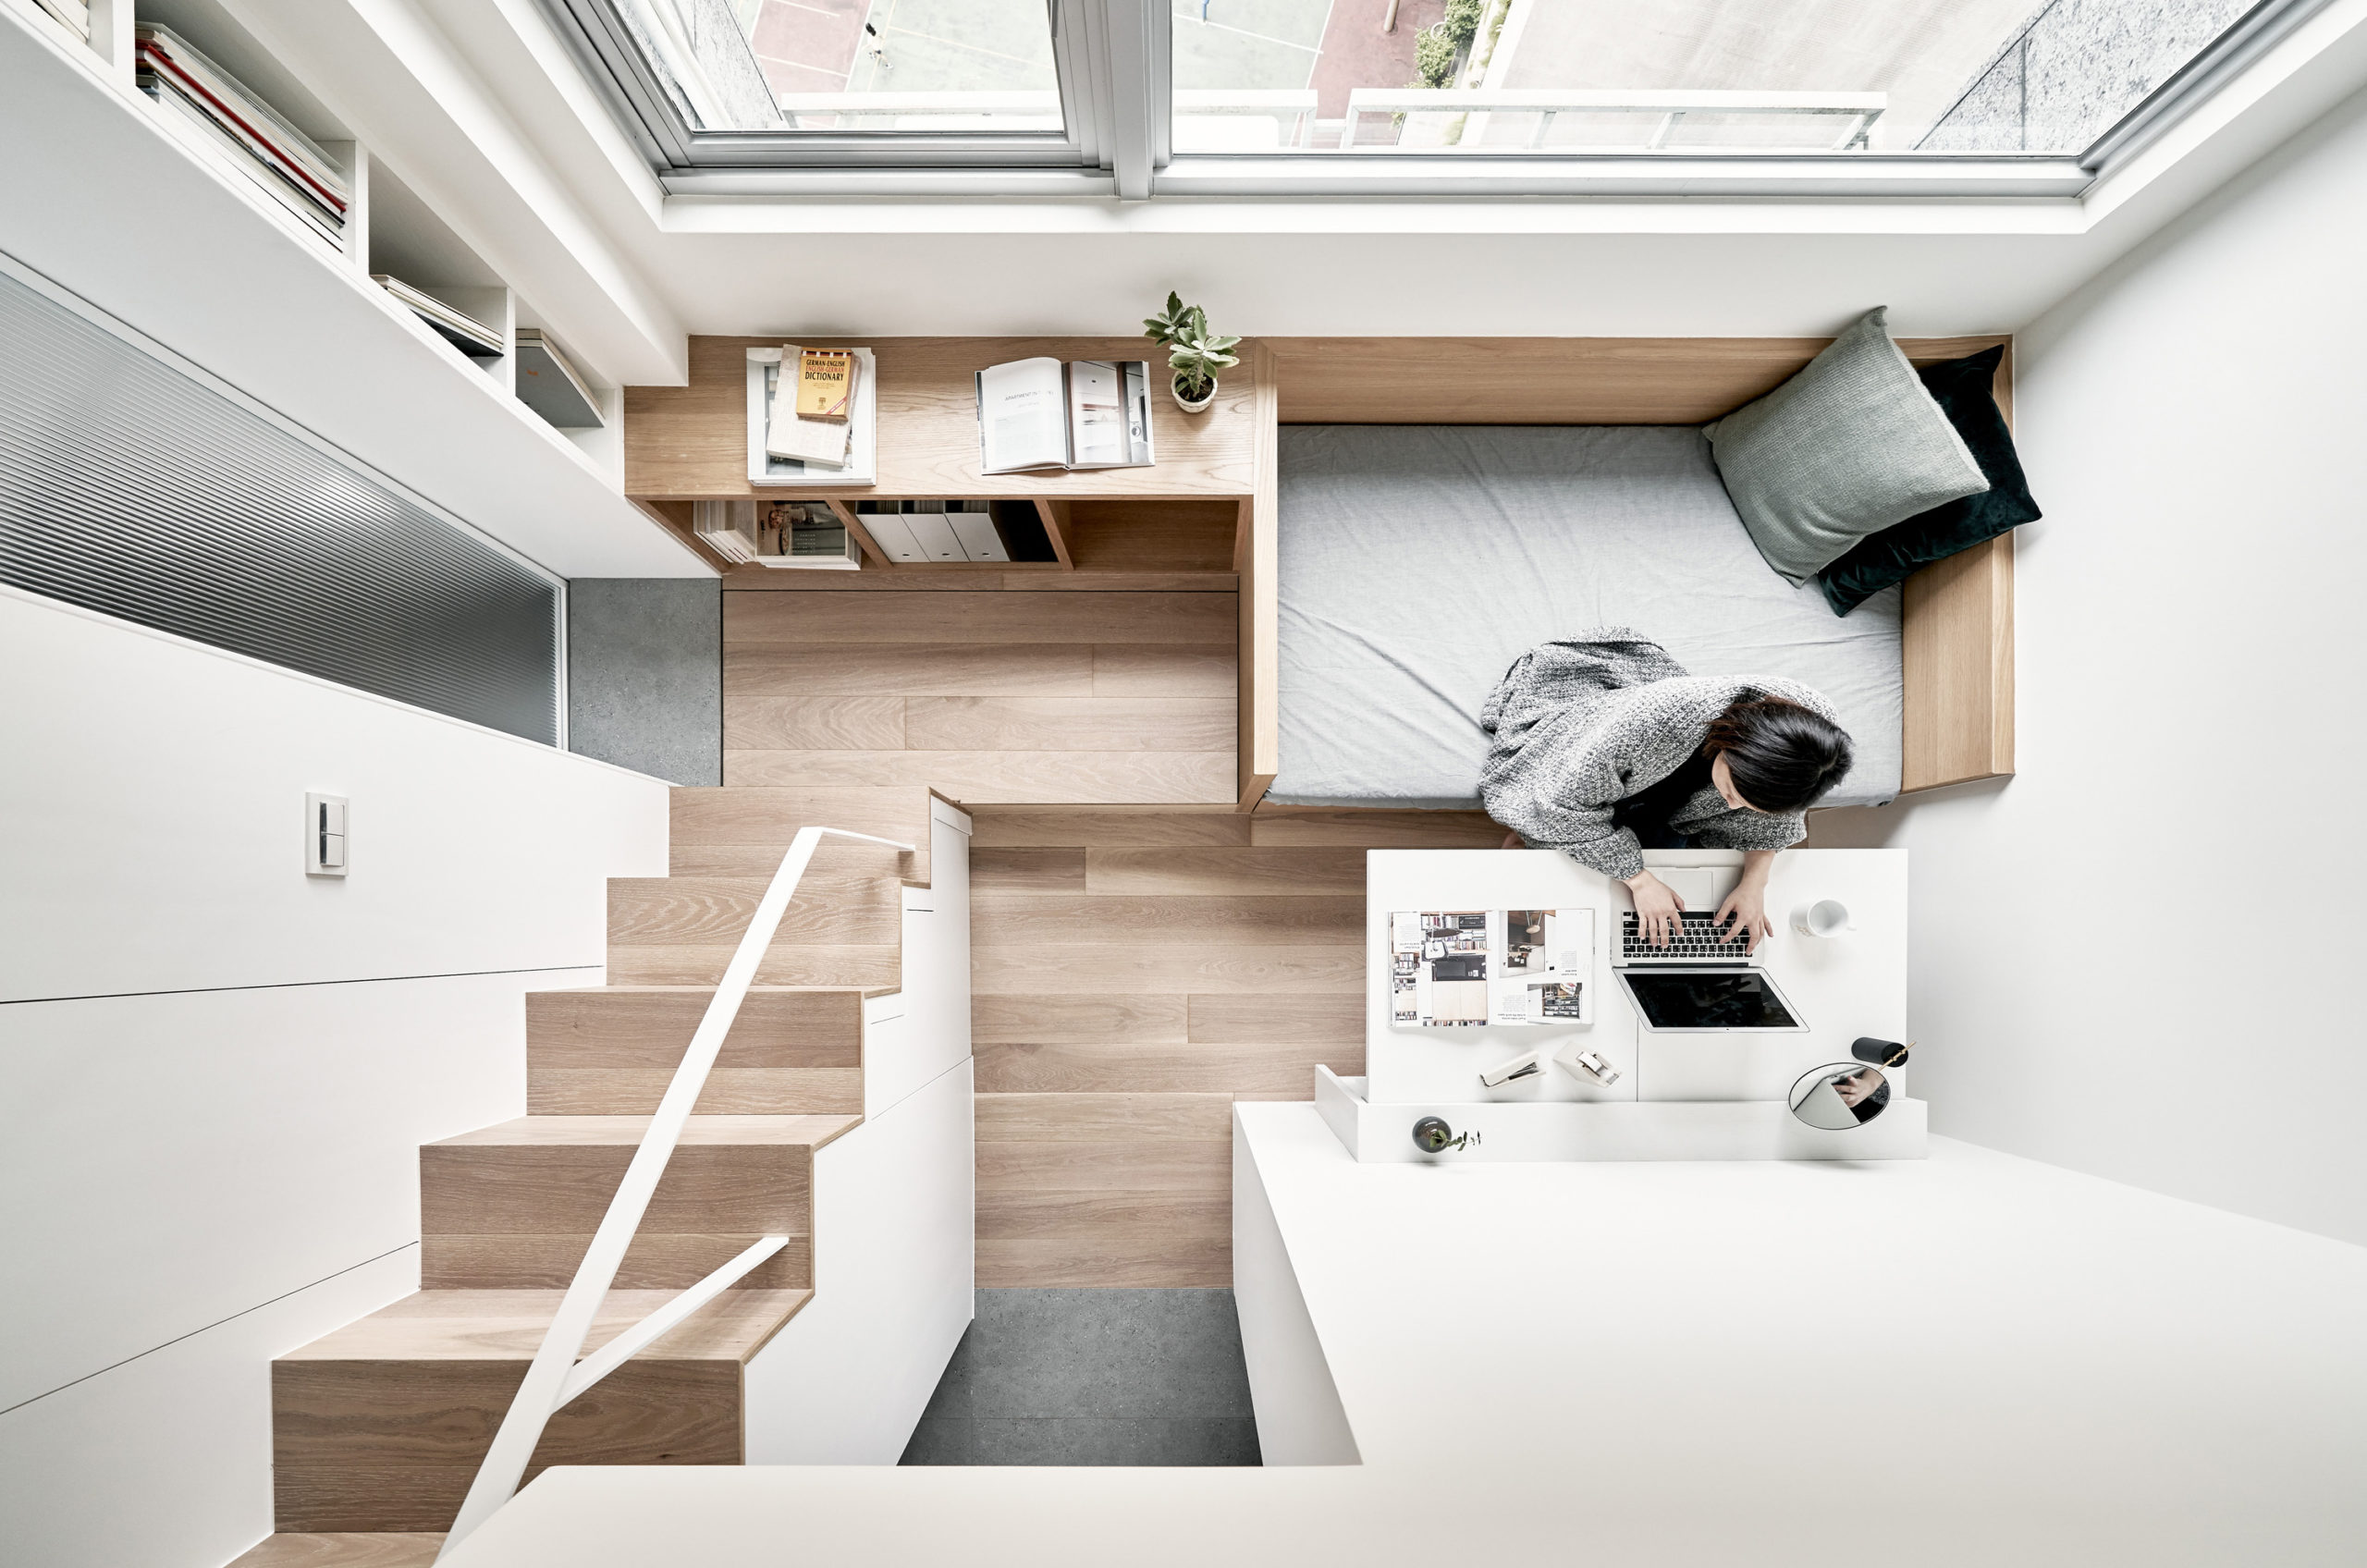 Smart Designs For Small Homes su Instagram: A cool, modular shoe